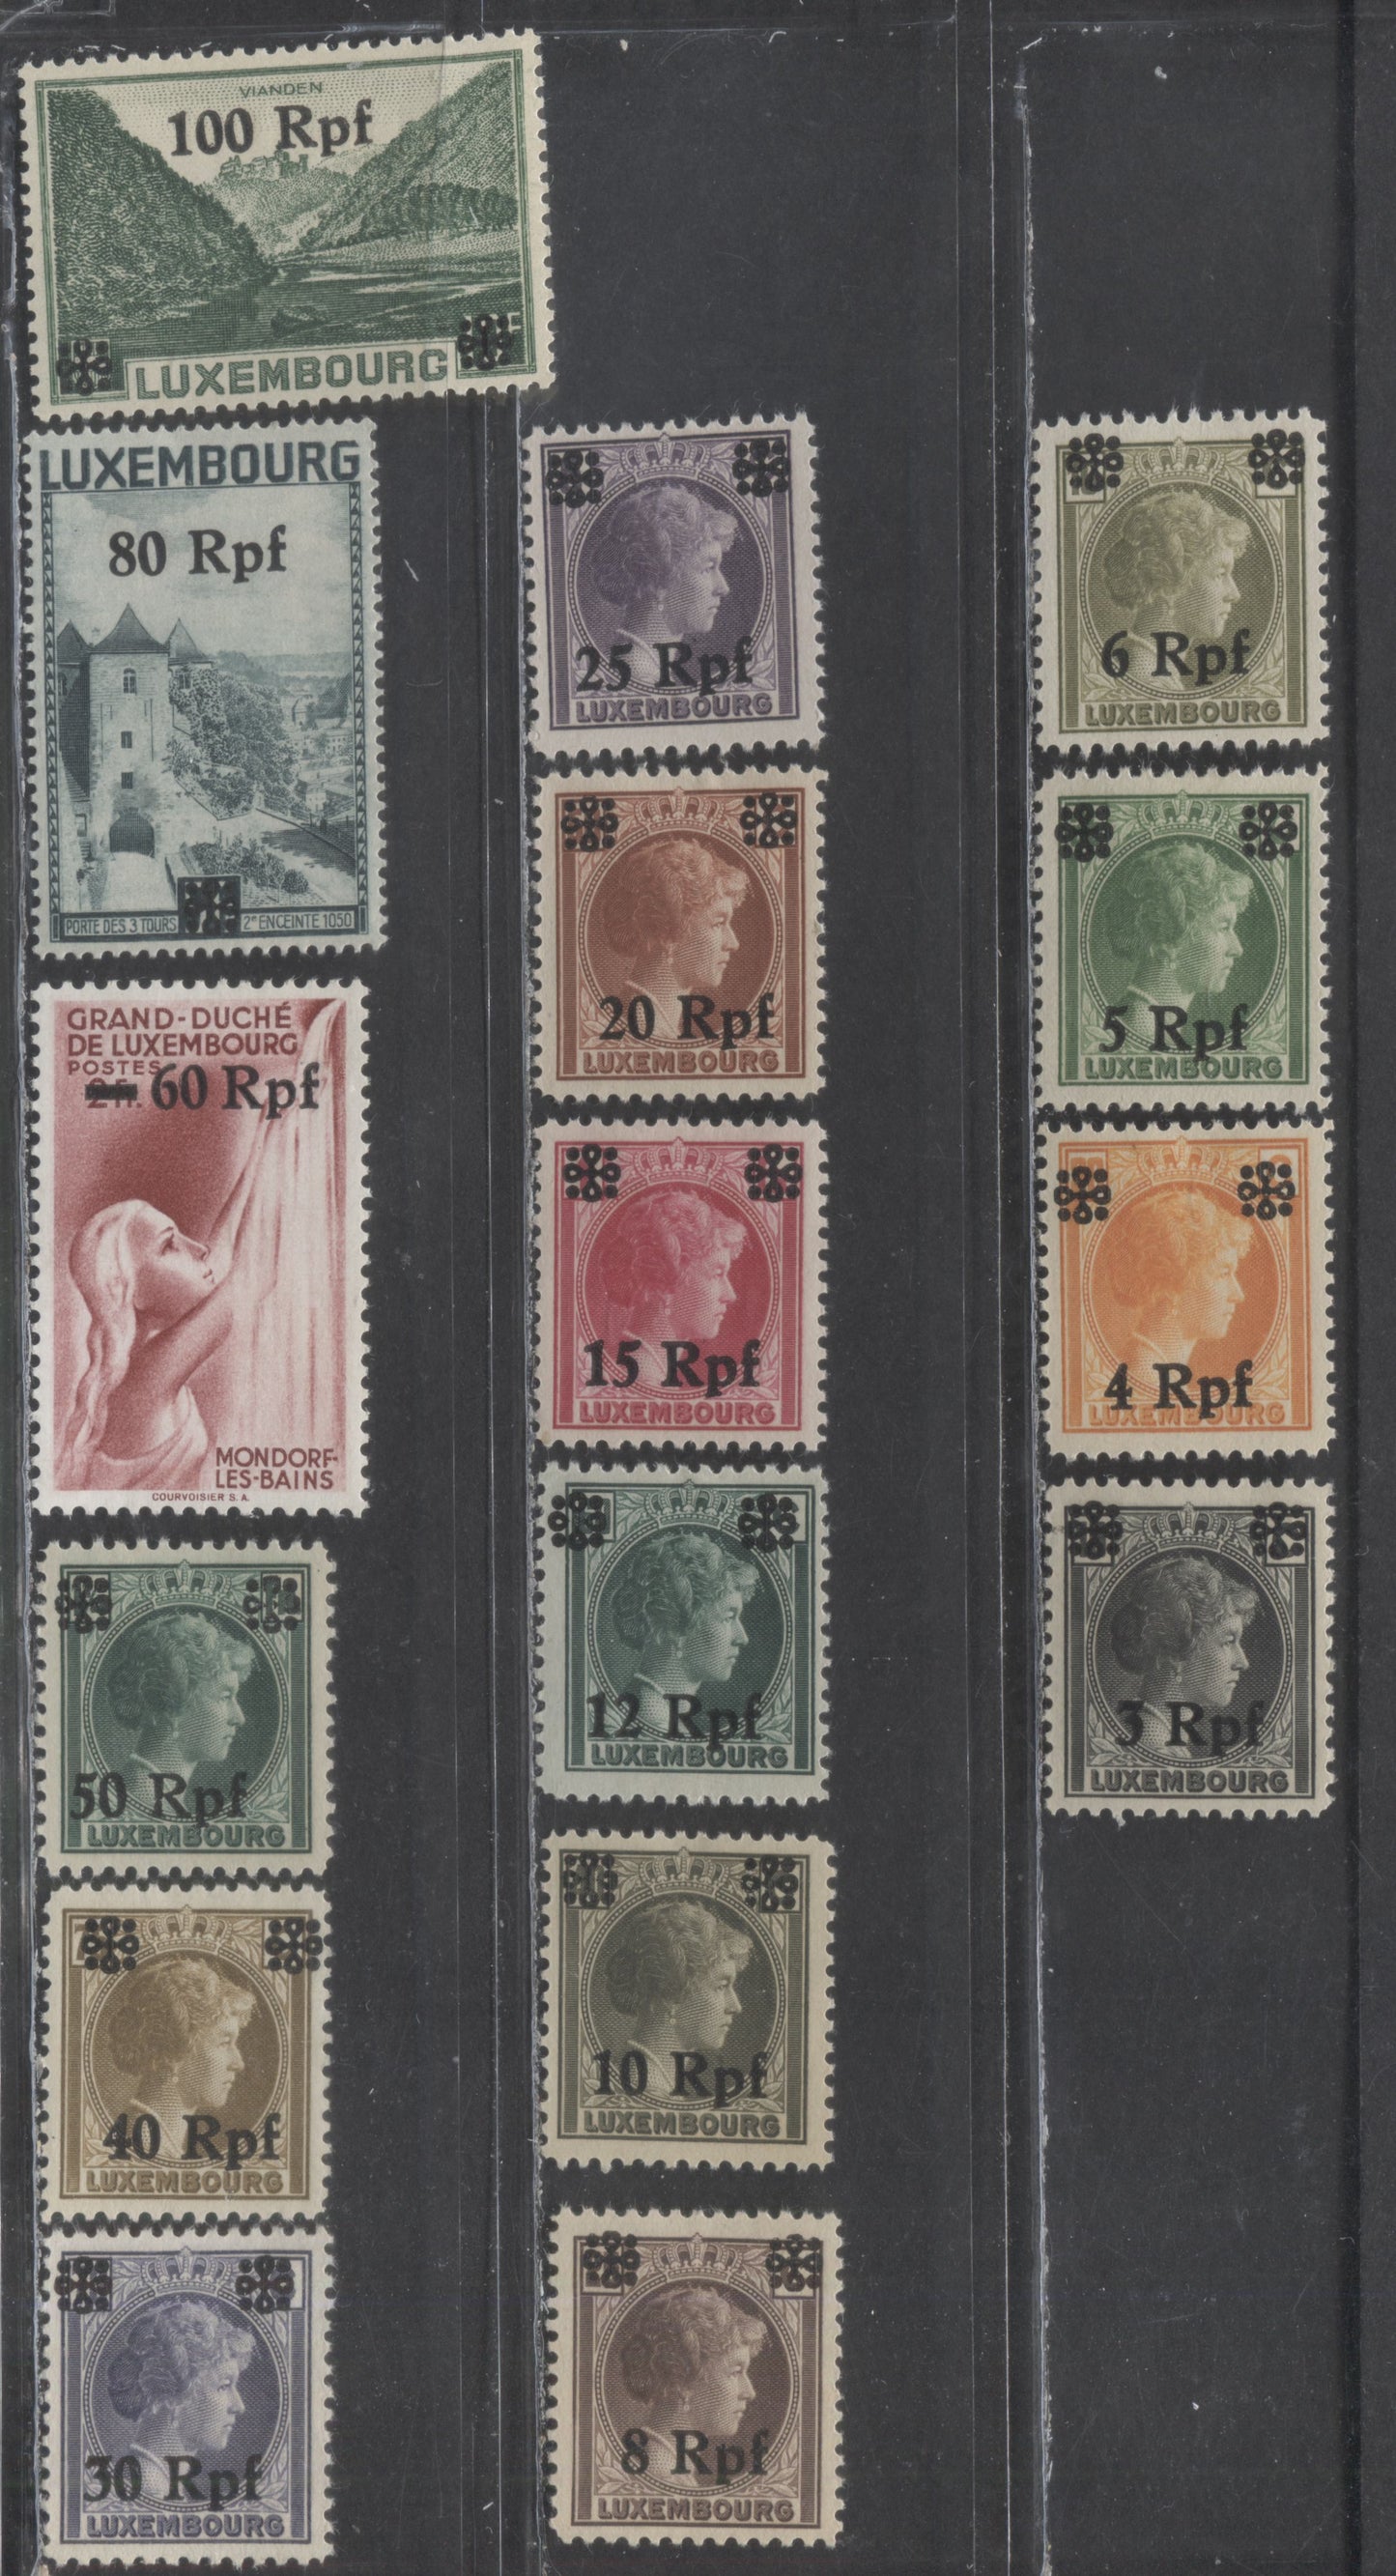 Lot 493 Luxembourg SC#N17-N32  1940, 16 F/VF OG Singles, 2022 Scott Classic Cat. $5.75 USD, Click on Listing to See ALL Pictures